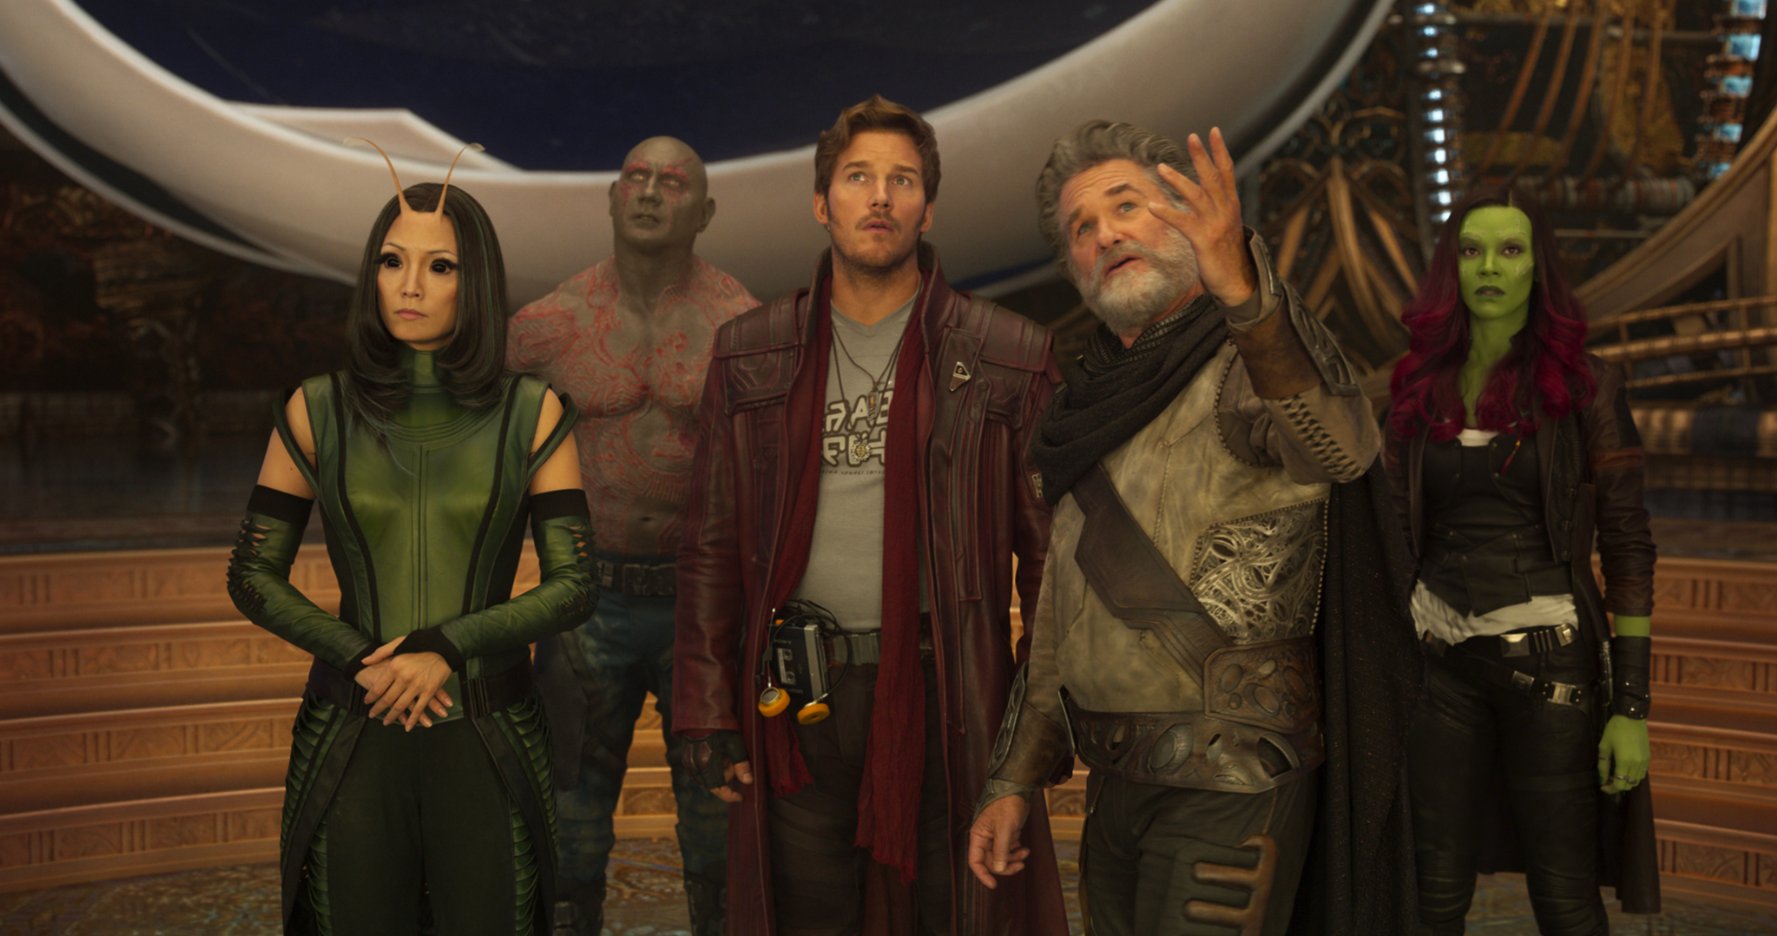 The cast of GUARDIANS OF THE GALAXY VOL. 2